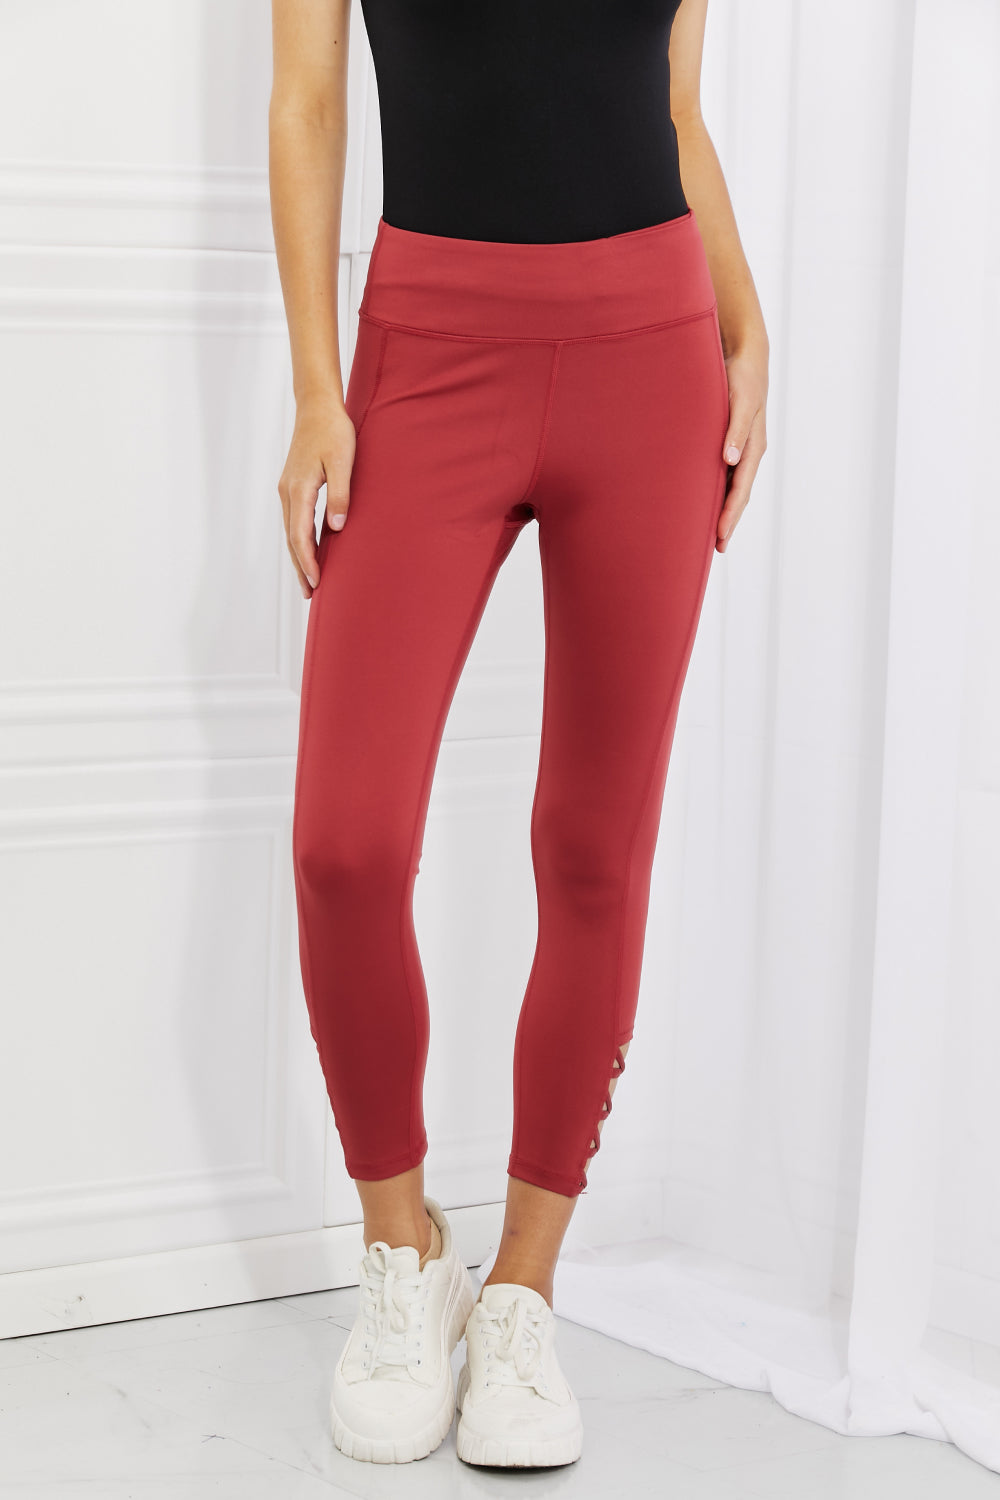 Ready For Action Ankle Cutout Active Leggings in Brick Red  Southern Soul Collectives 